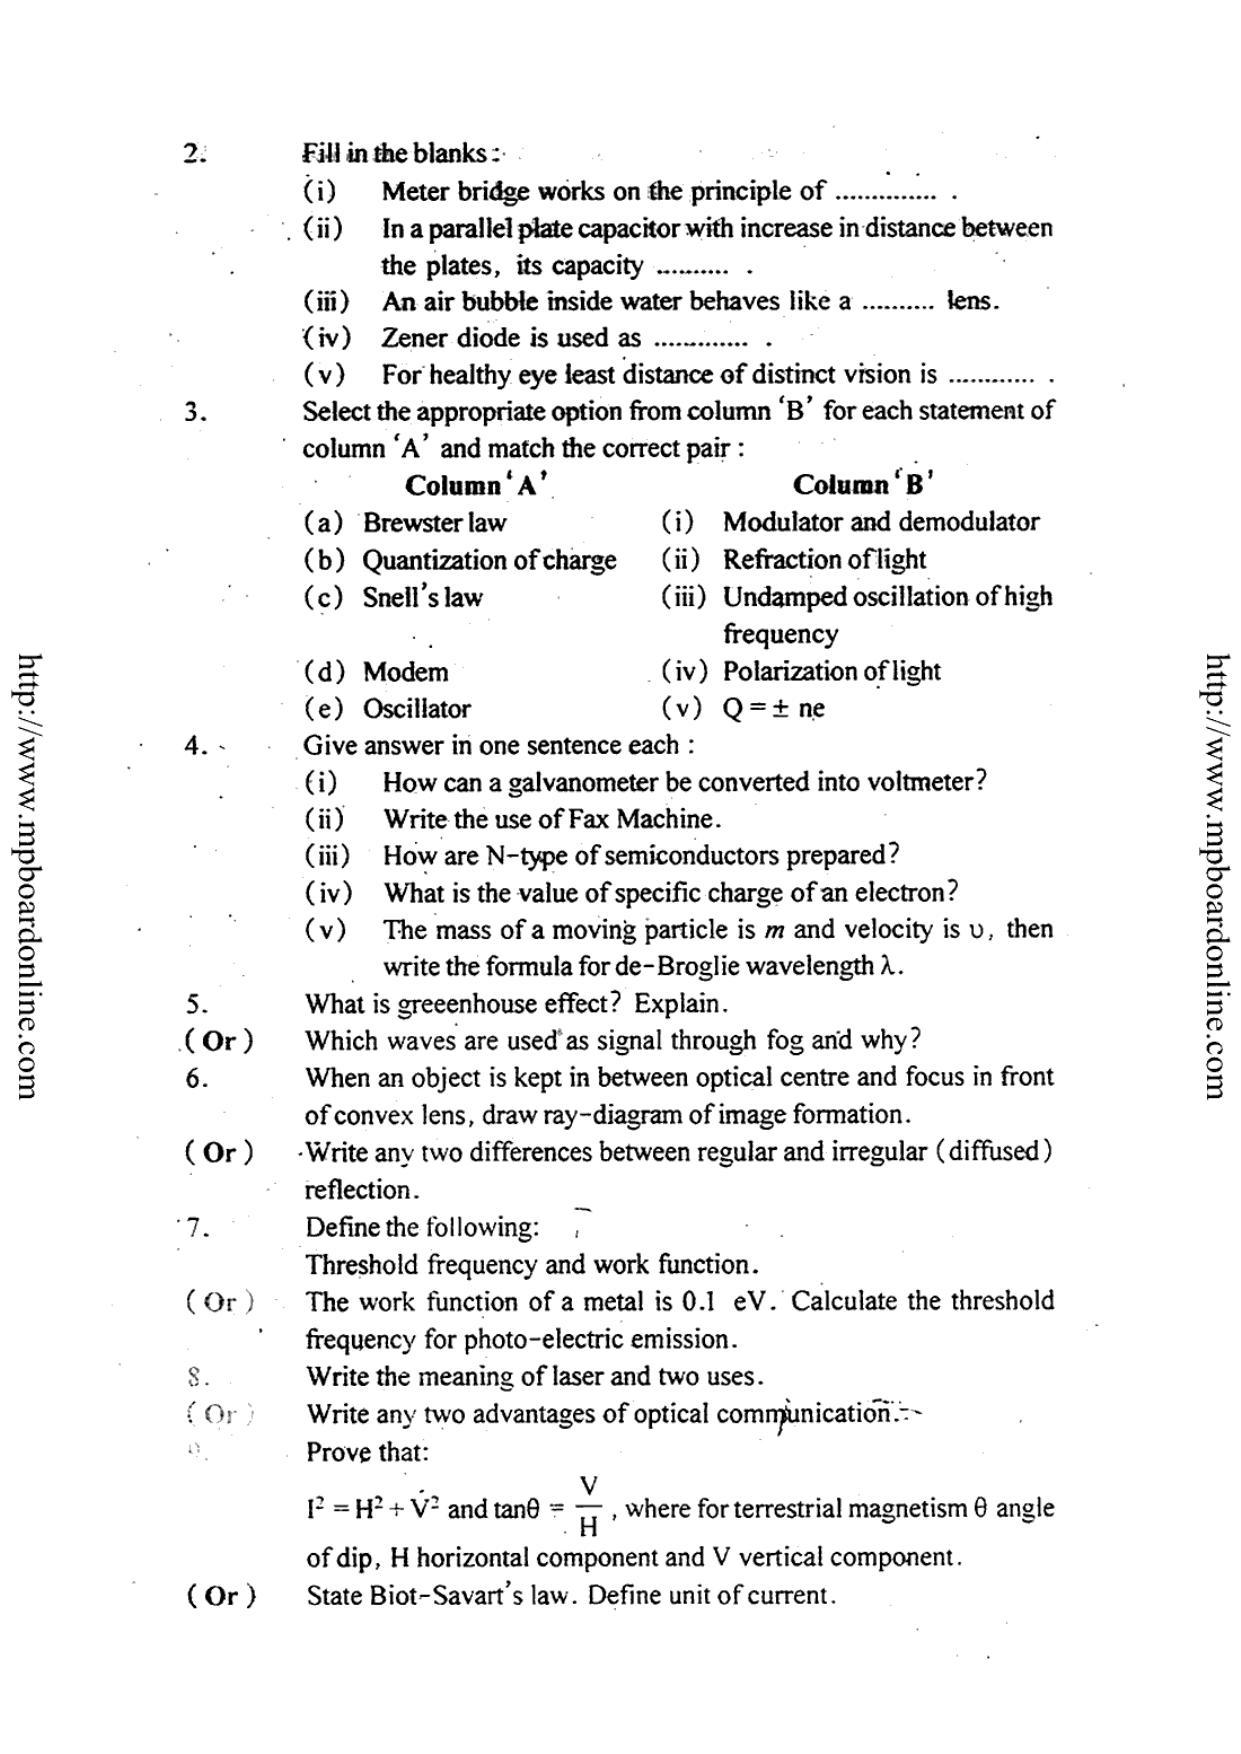 MP Board Class 12 Physics (English Medium) 2014 Question Paper - Page 2